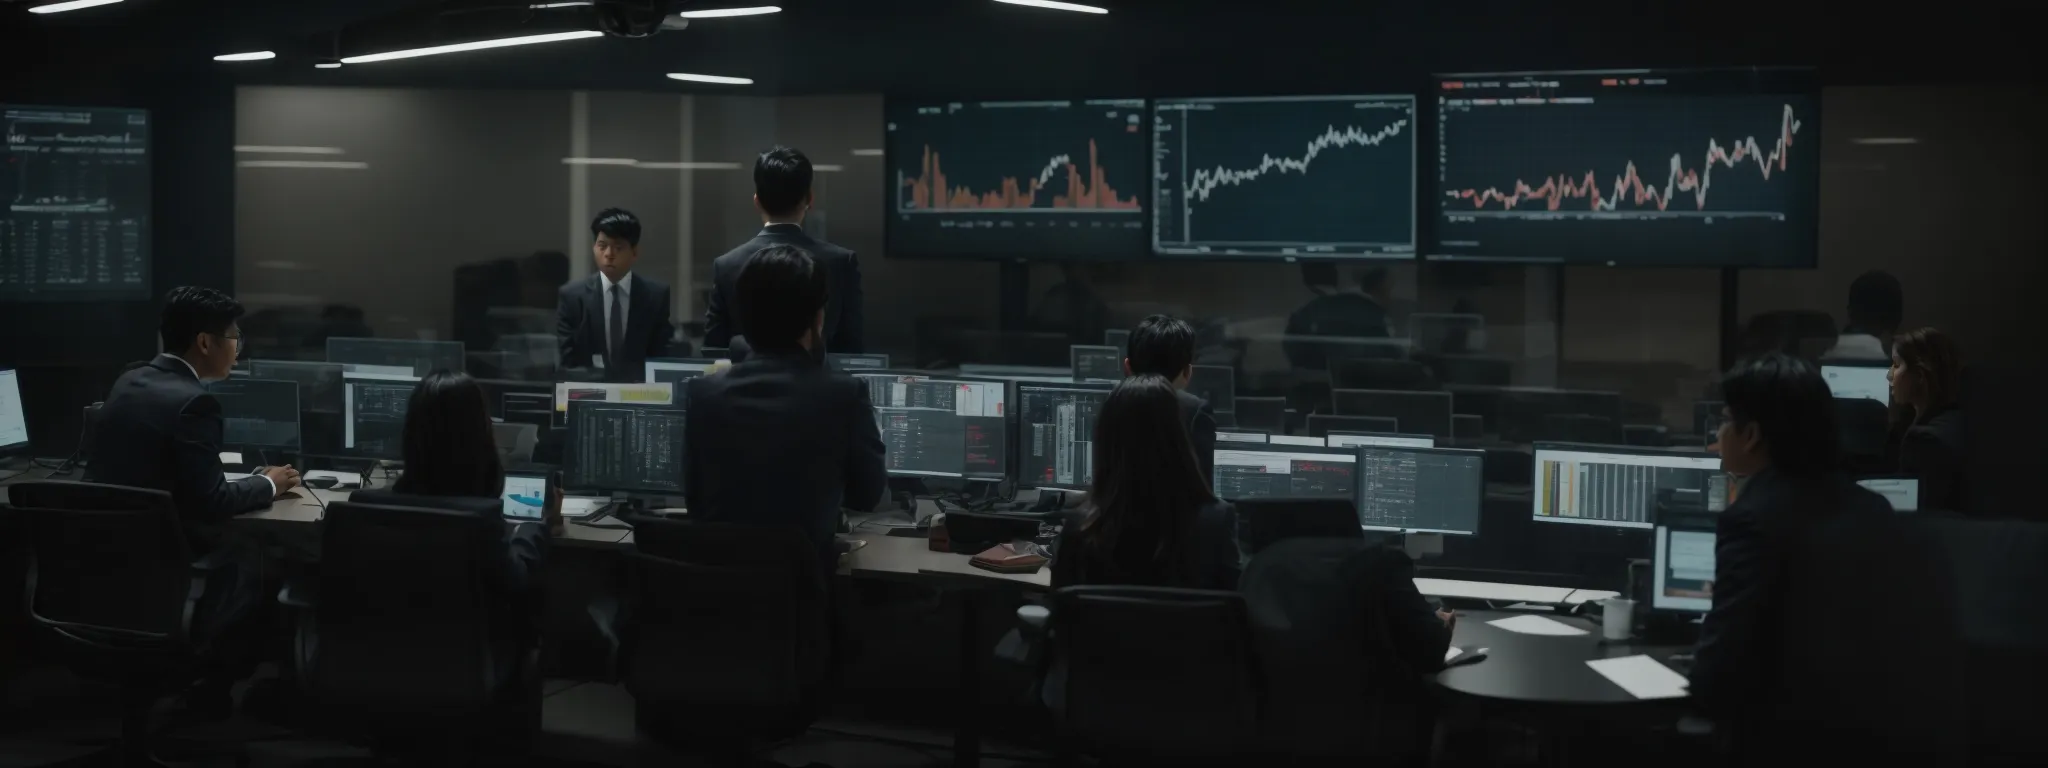 a team in a war room actively monitoring and discussing strategies in front of a large digital screen showing website analytics.